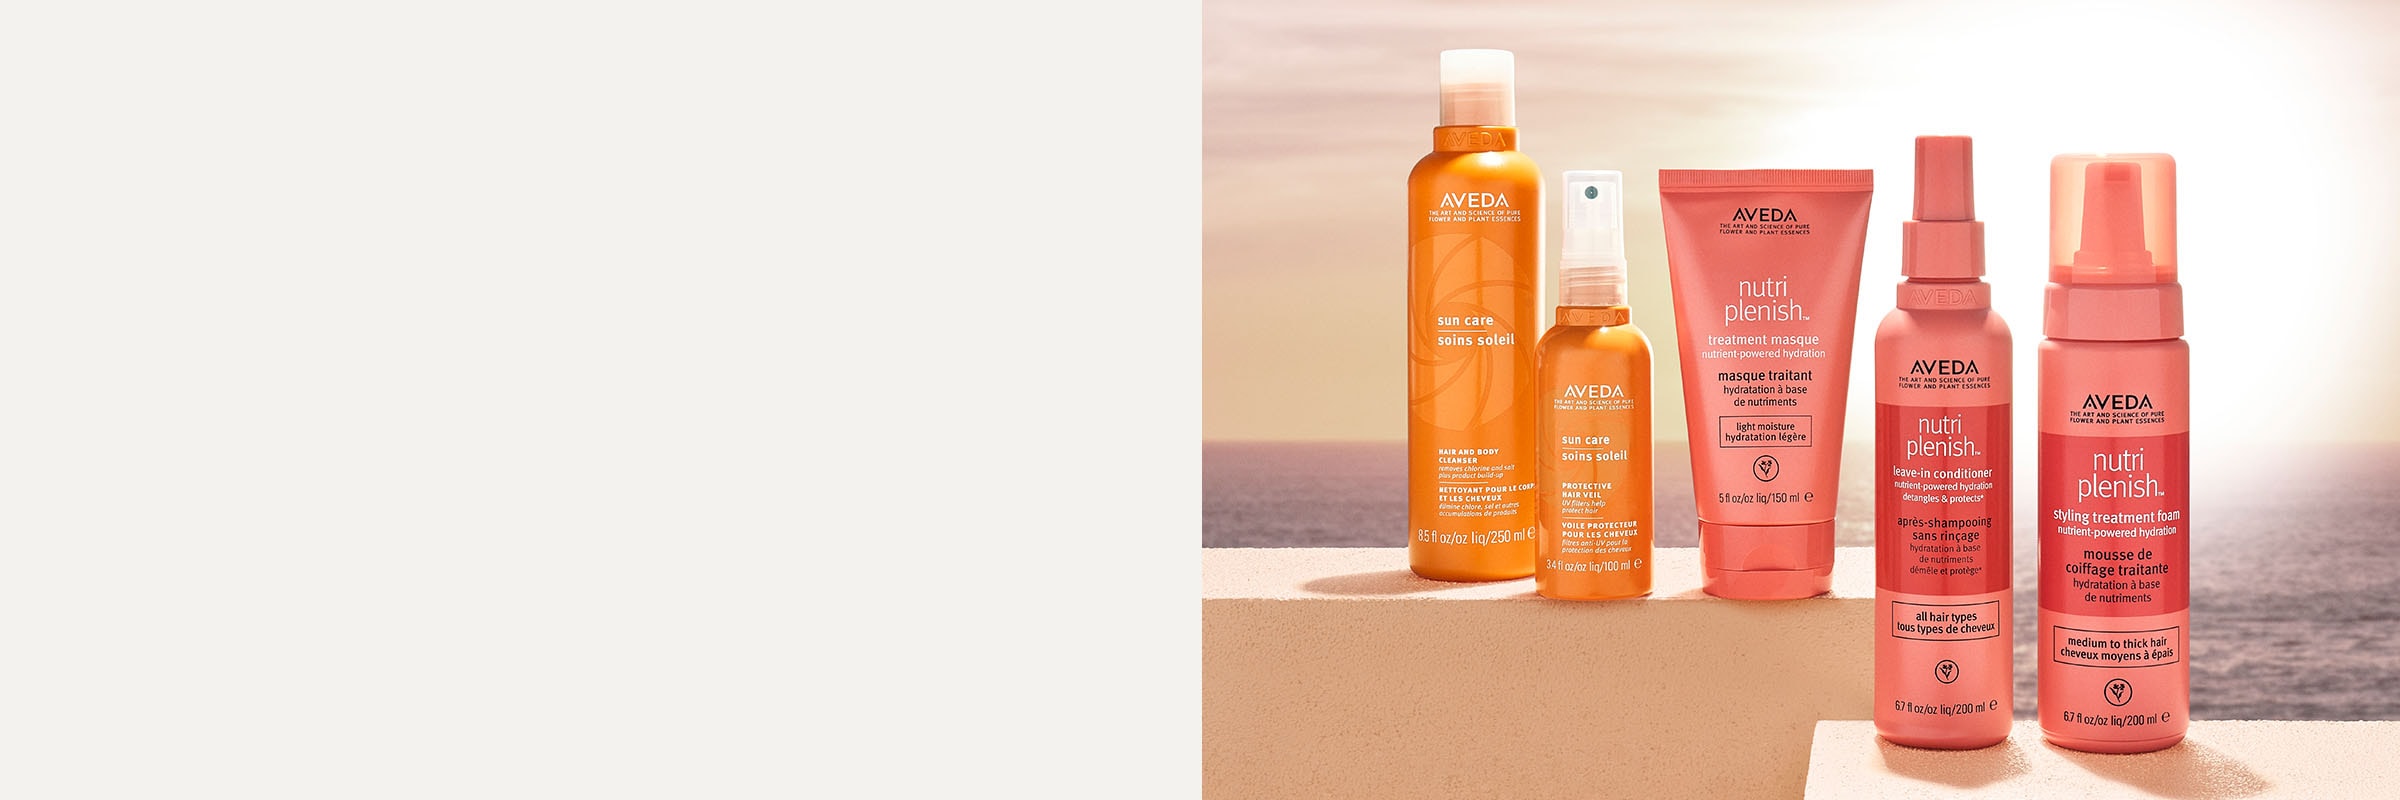 aveda summer hair care products